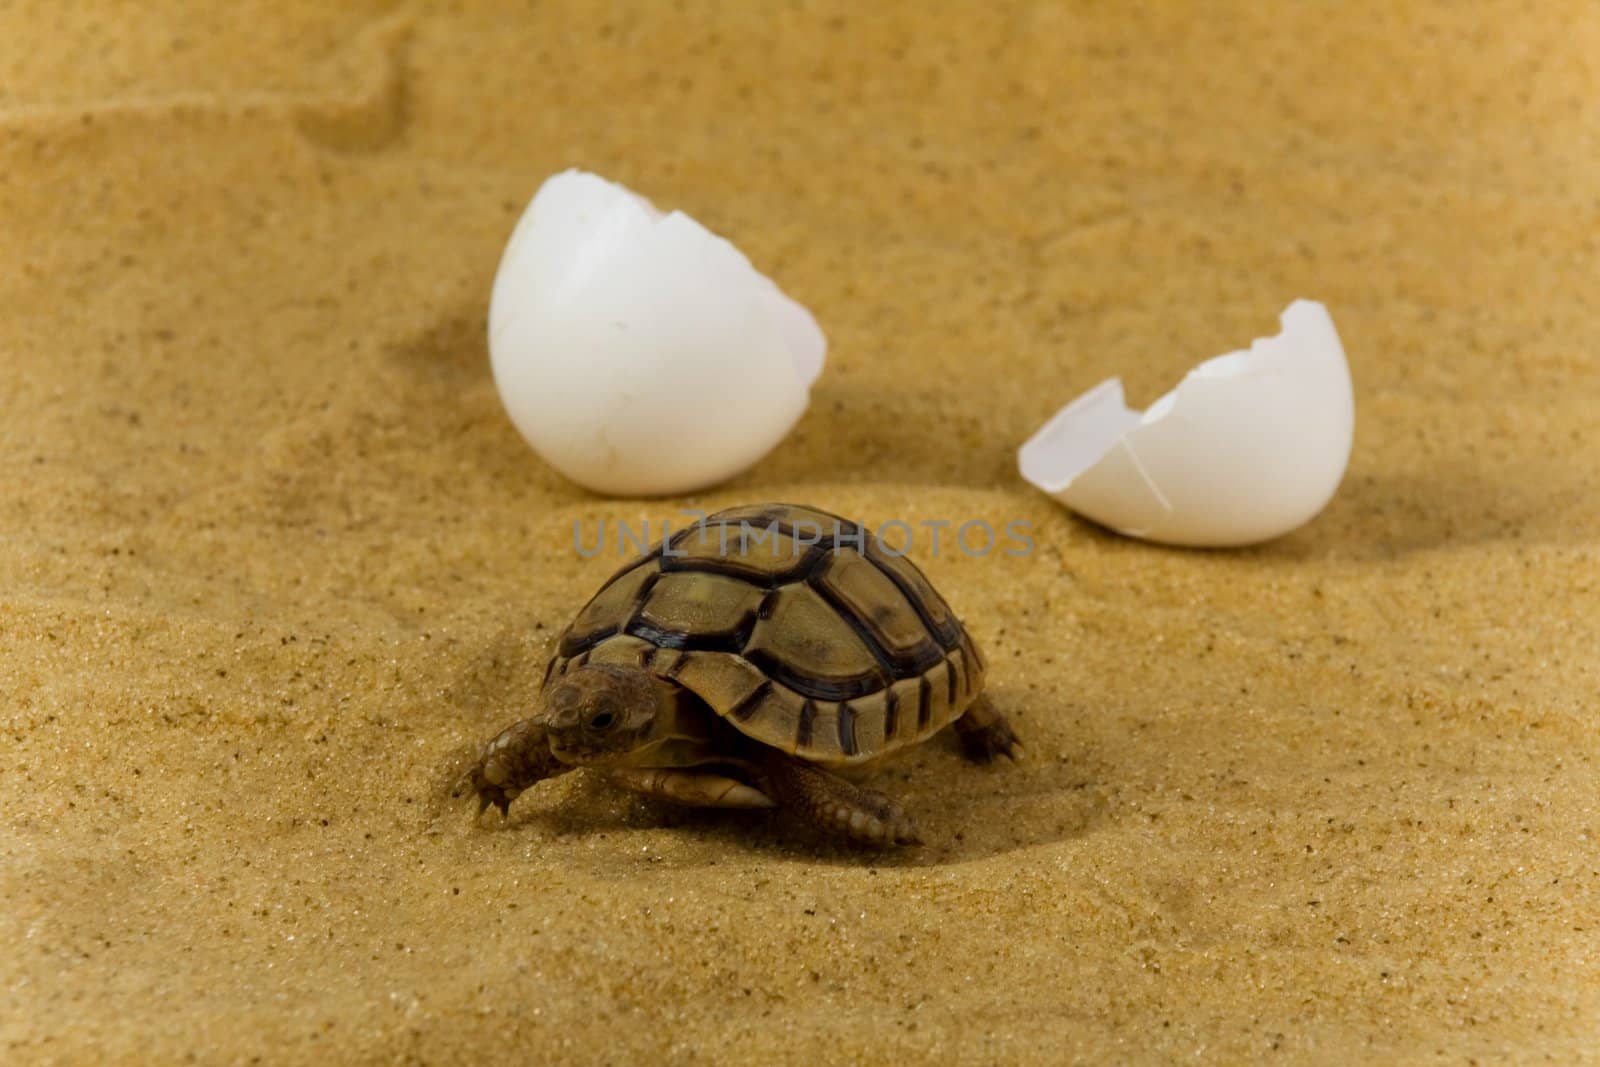 Closeup of a small steppe tortoise with shell eggs from which it hatched on the sand